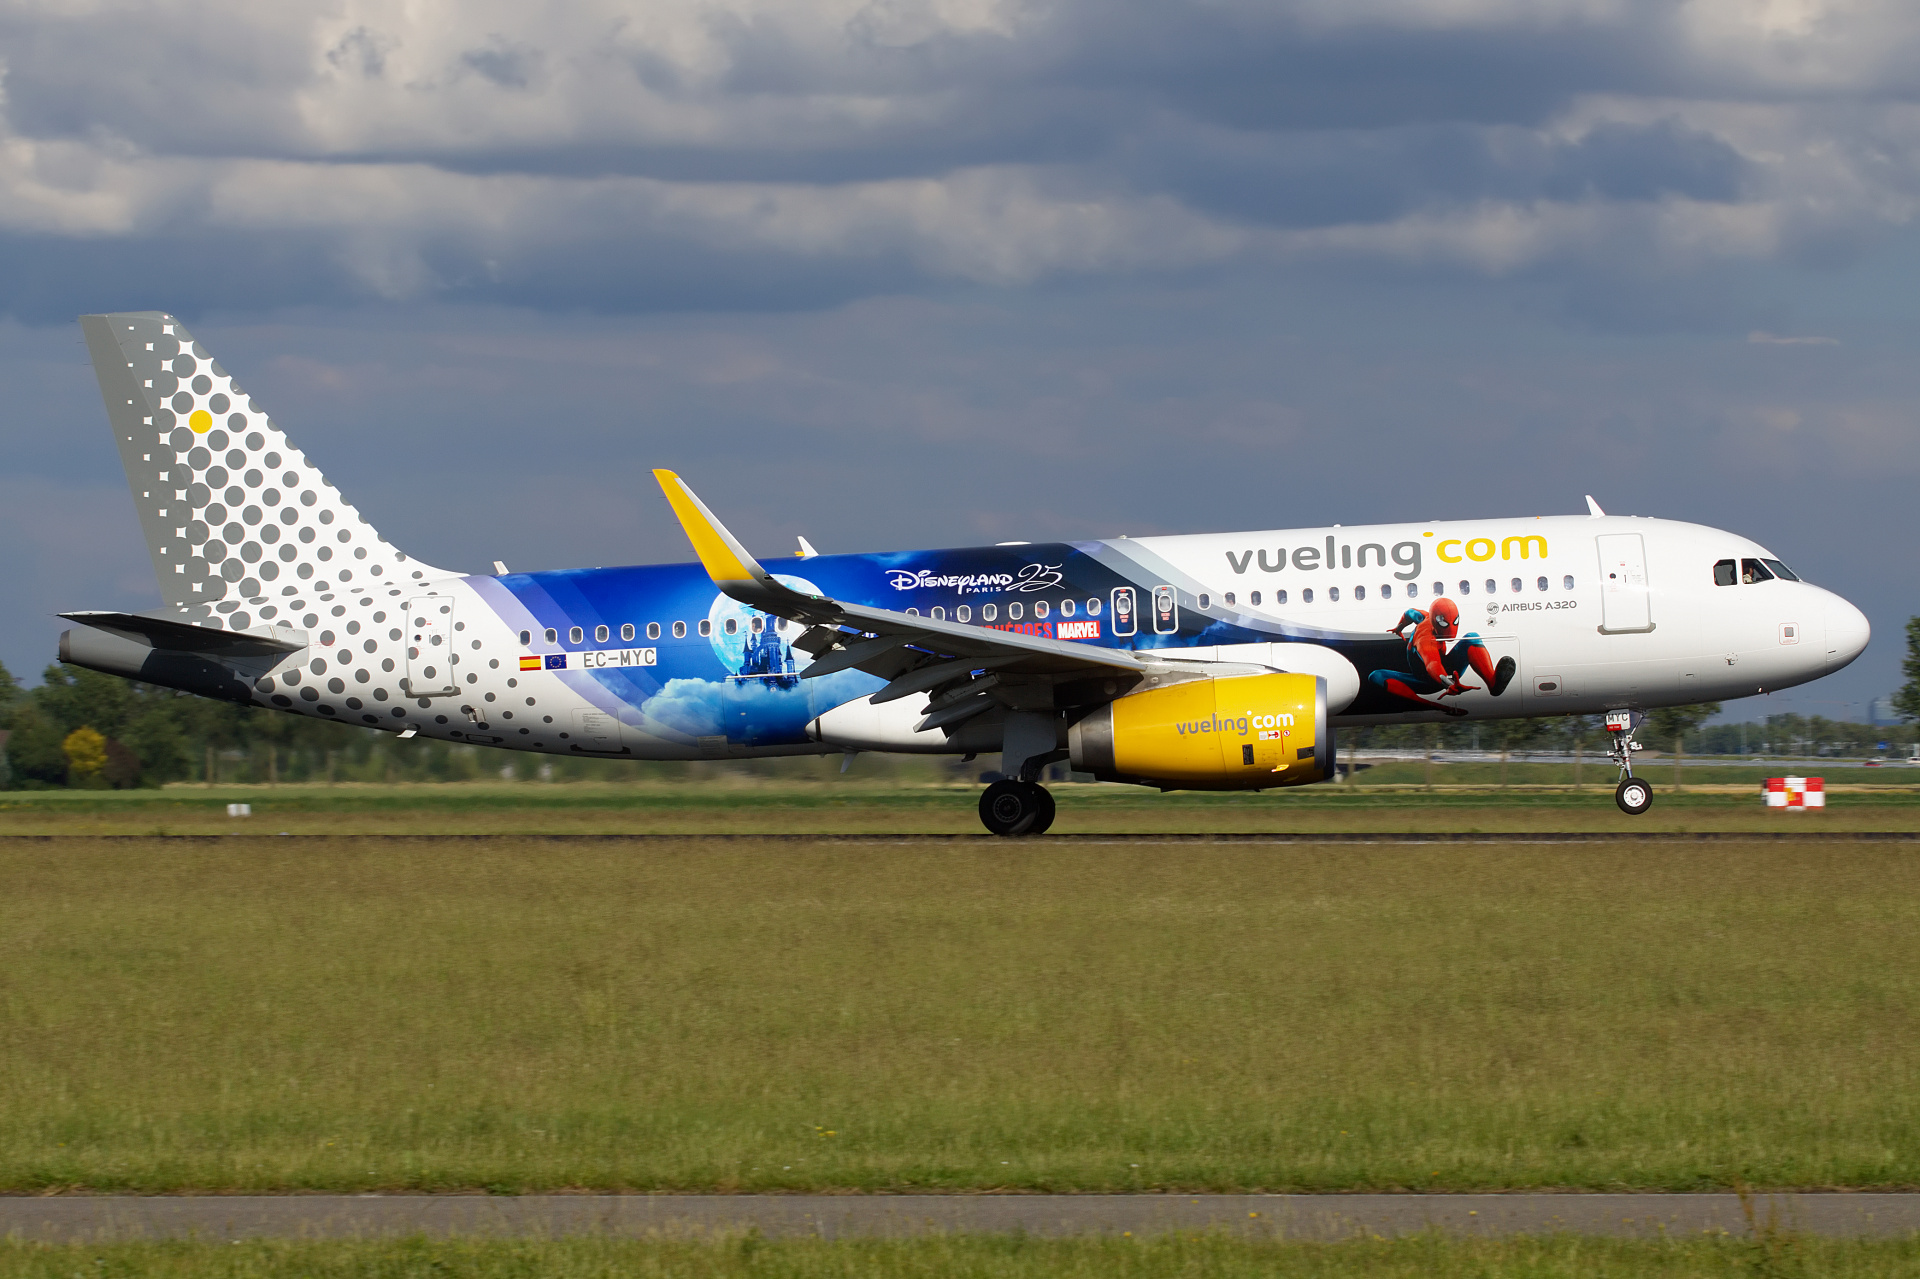 EC-MYC (Disneyland Paris - 25 Years livery) (Aircraft » Schiphol Spotting » Airbus A320-200 » Vueling Airlines)